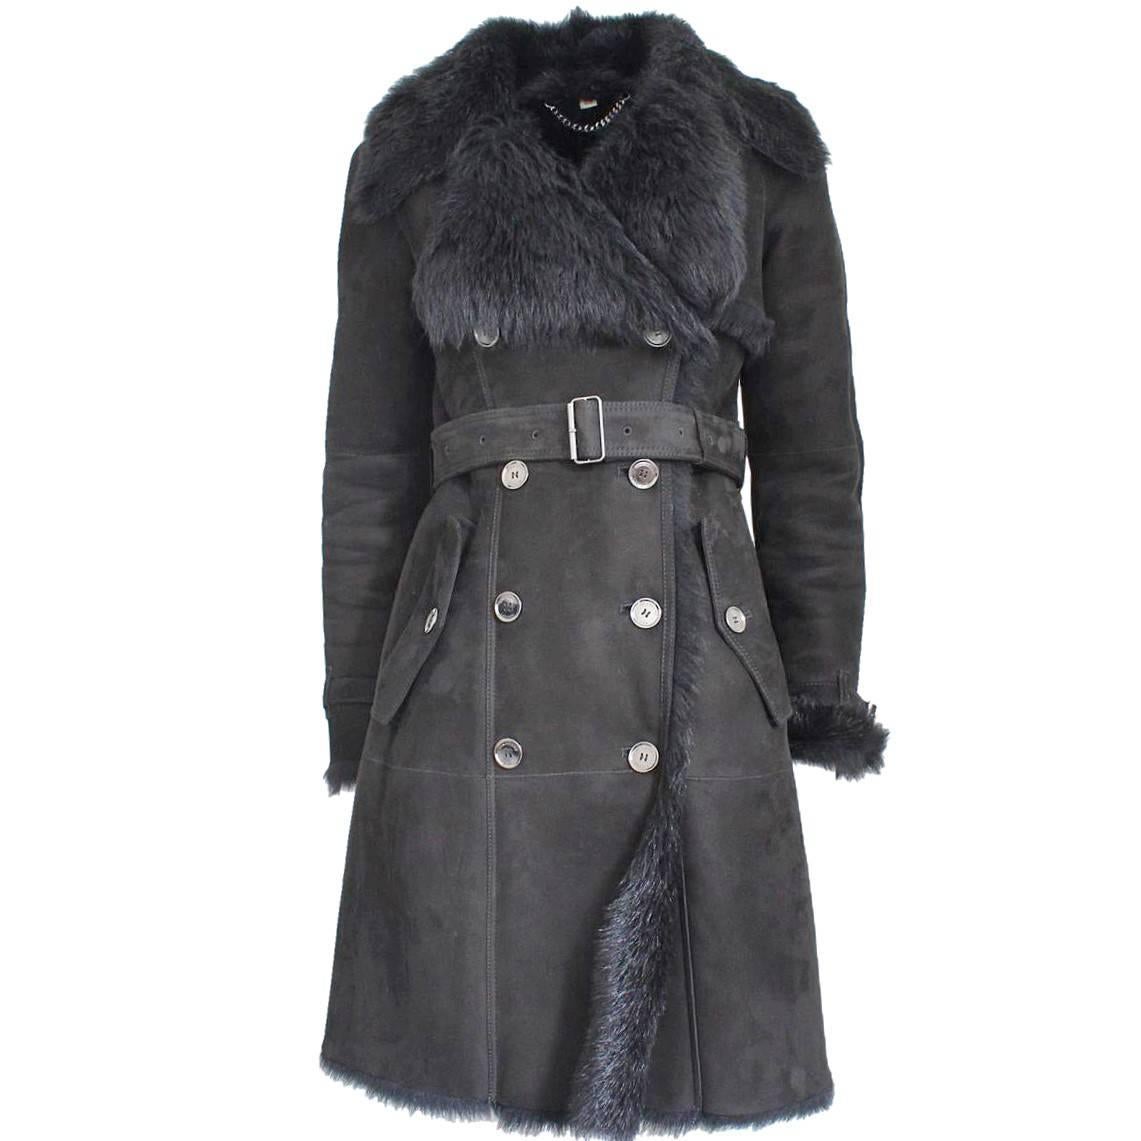 Burberry Shearling Coat - 4 For Sale on 1stDibs | burberry shearling jacket,  burberry shearling trench coat, burberry shearling coat sale